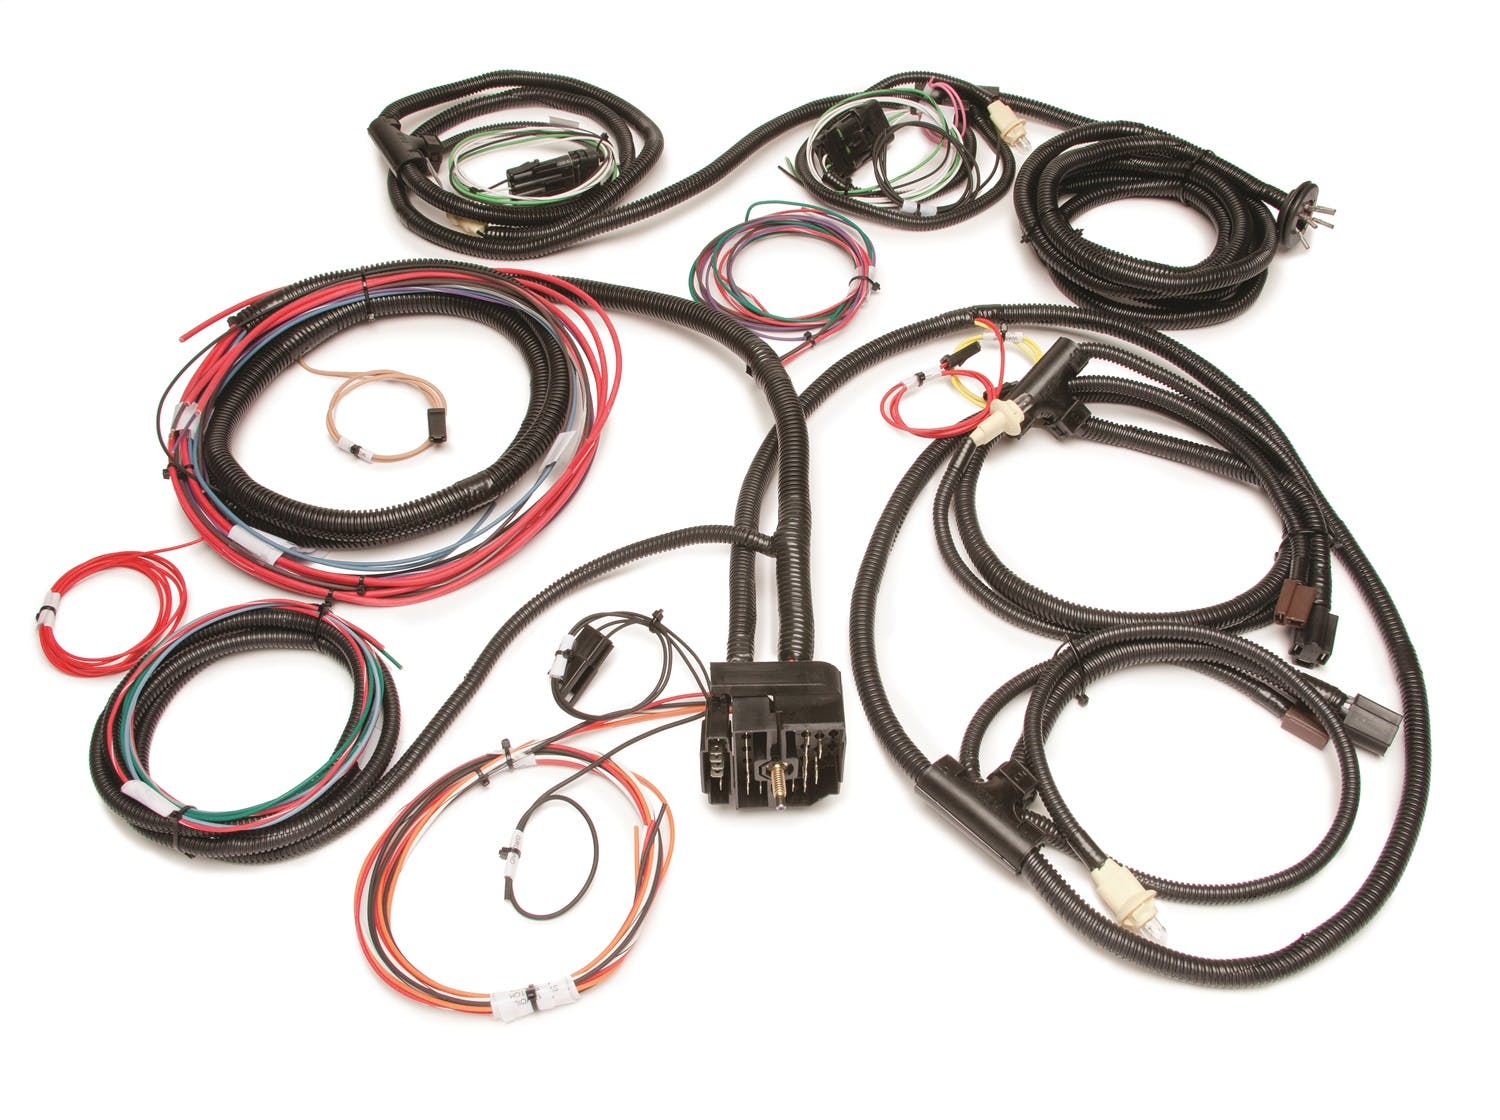 Painless 10150 21 Circuits Wiring Harness